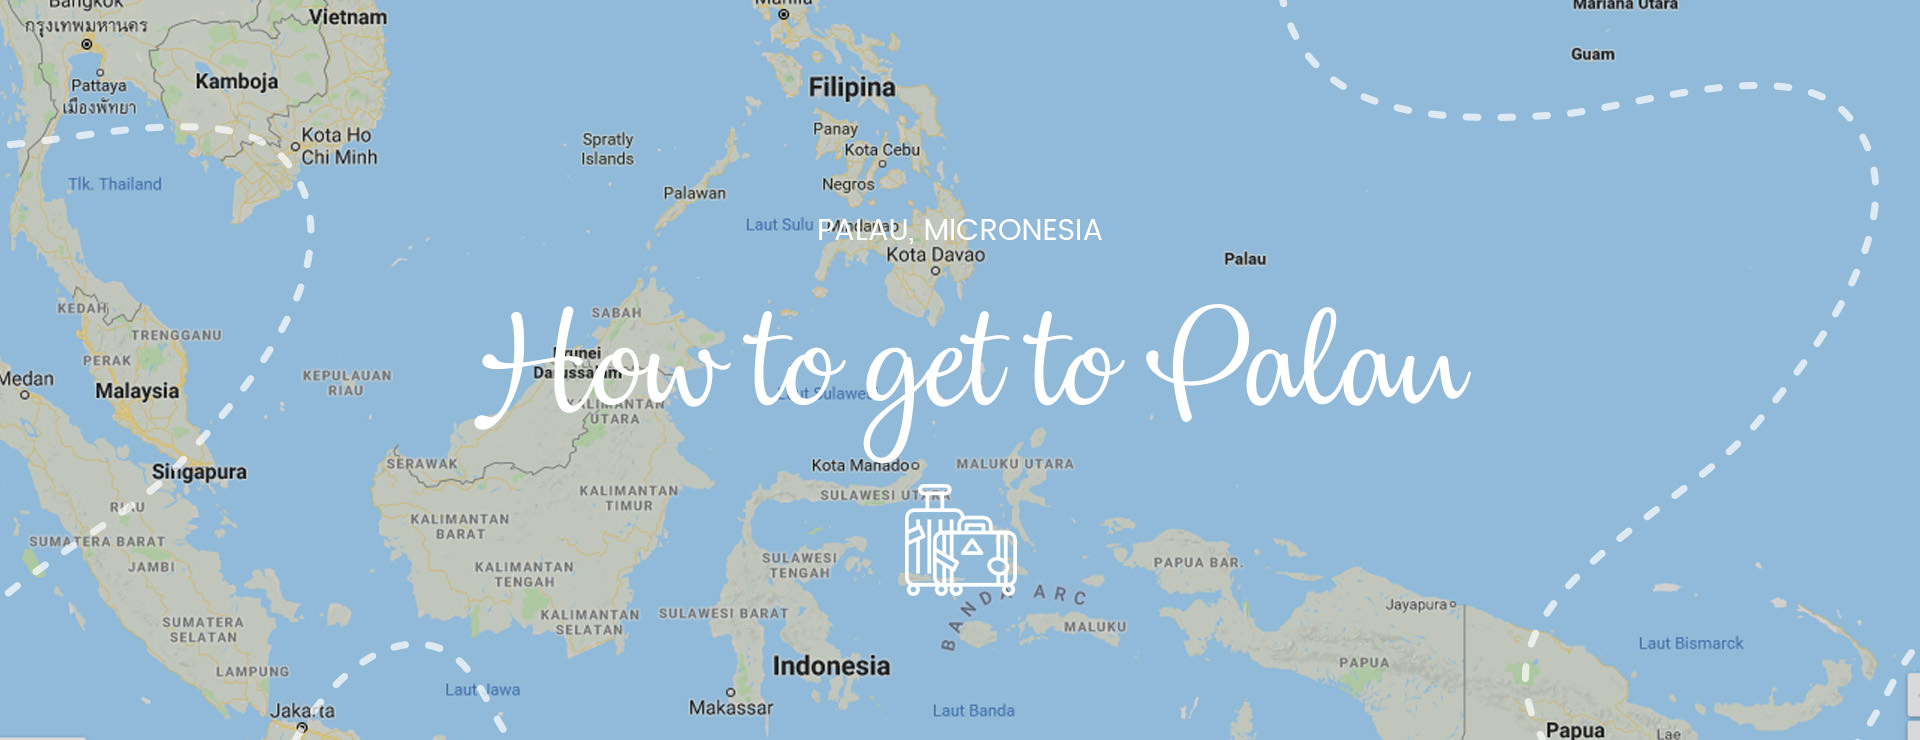 How to get to Palau